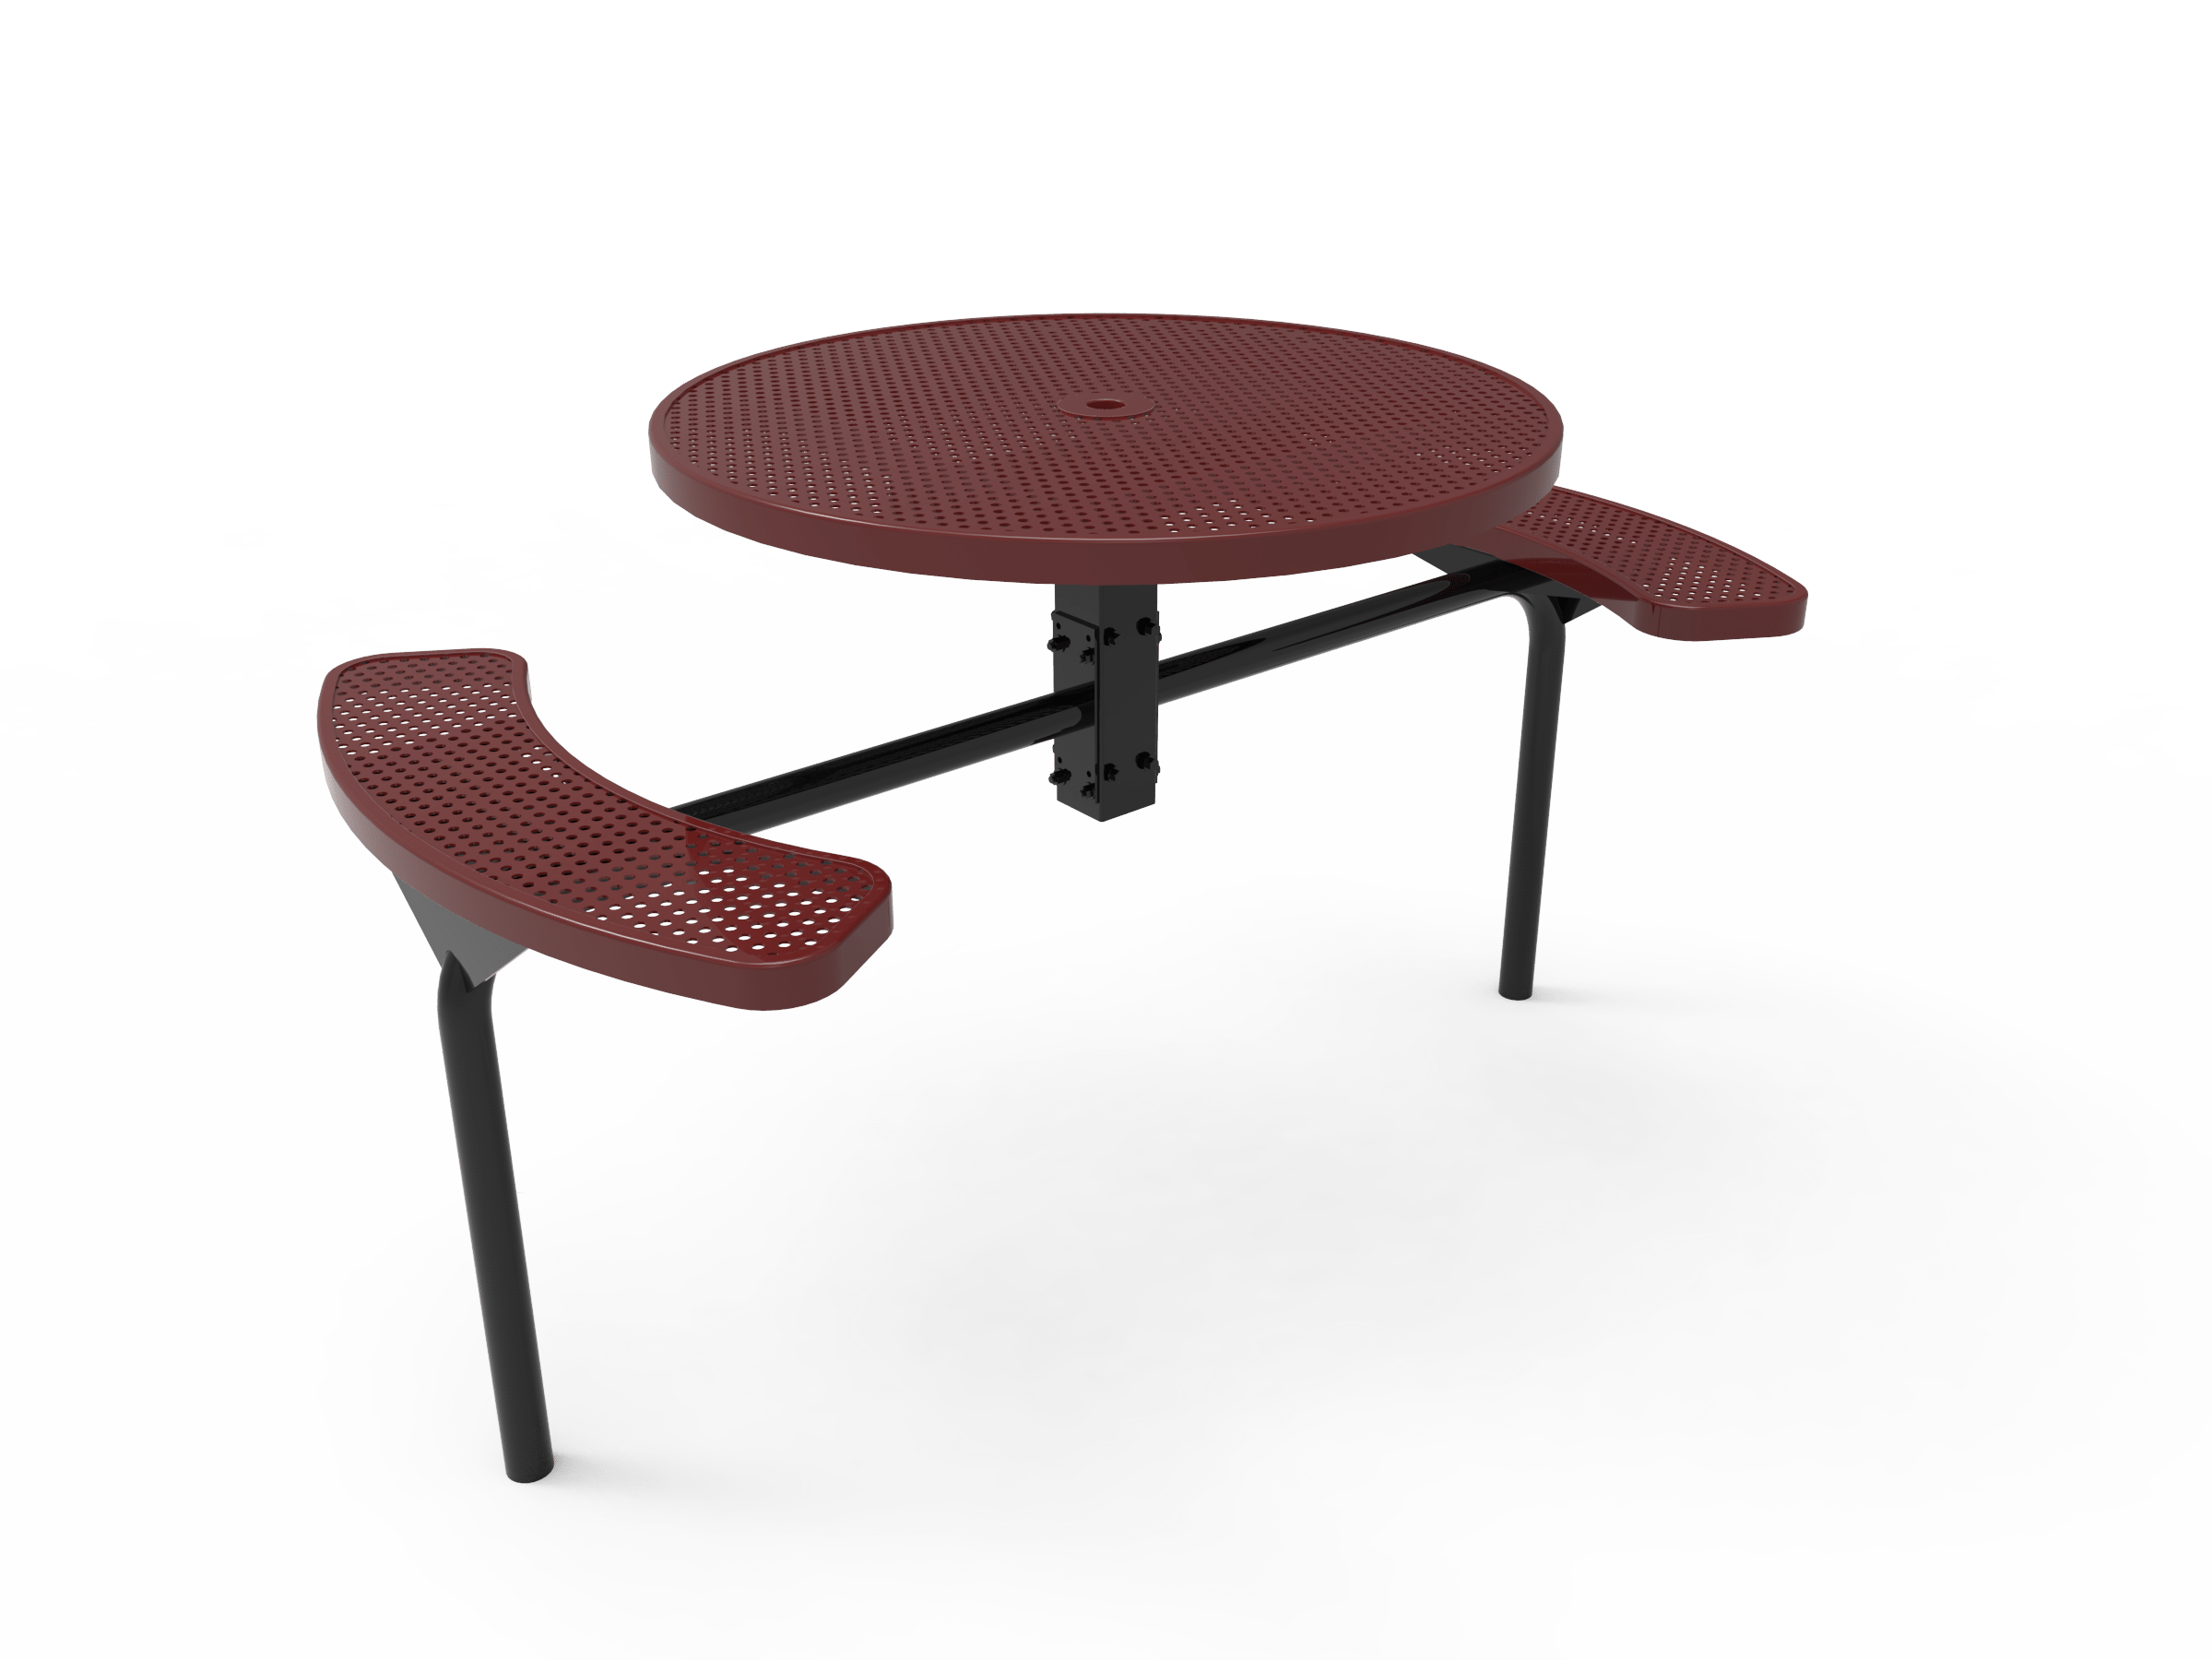 46″ Round Nexus In Ground Table With 2 Seats-Punched
TRD46-D-51-012
Industry Standard Finish
$1439.00
TRD46-B-51-012
Advantage Premium Finish
$2019.00
